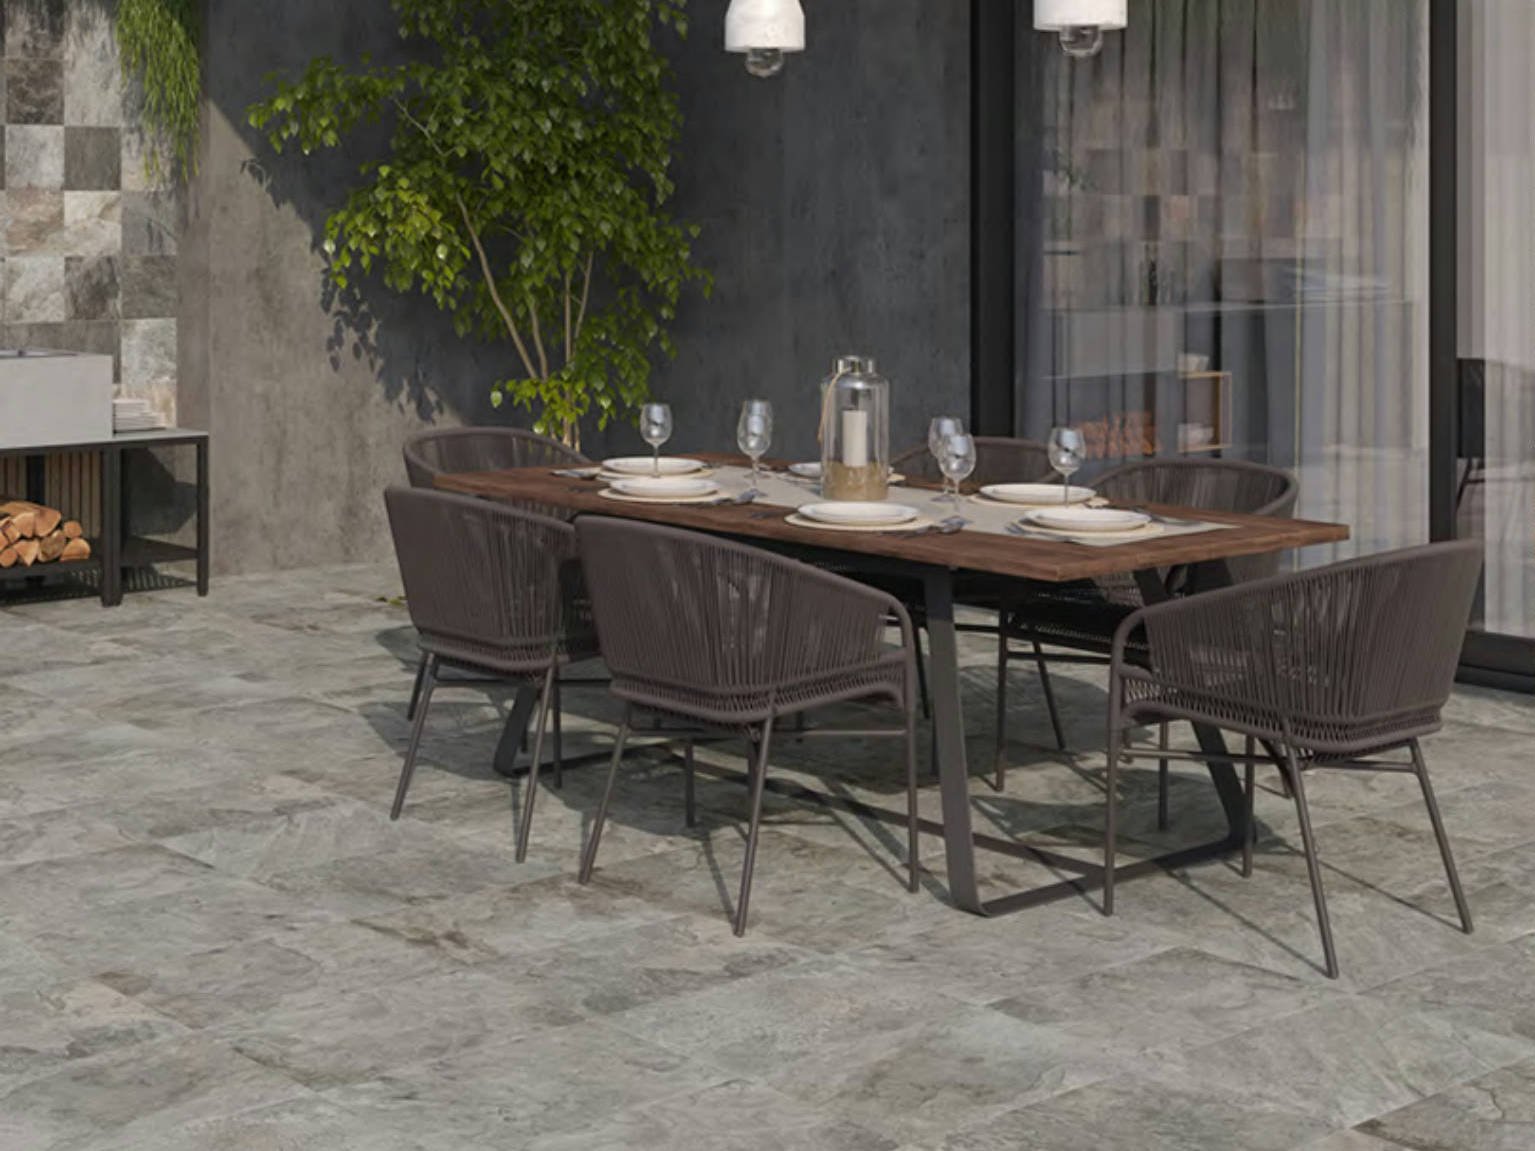 Nepal Slate Chitwan Gris12x24 | Qualis Ceramica | Luxury Tile and Vinyl at affordable prices